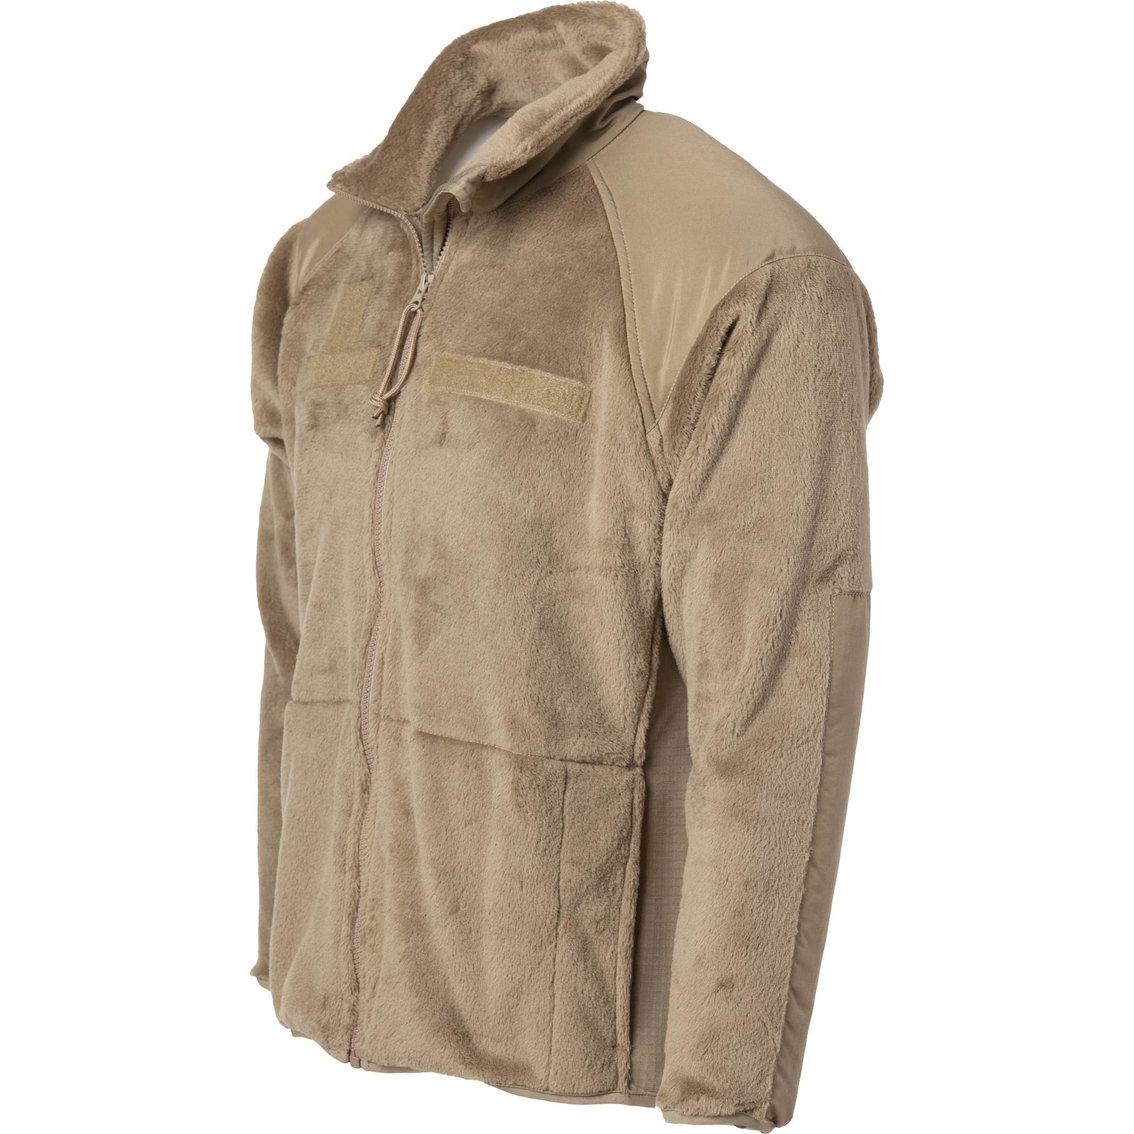 Rothco Gen III Military ECWCS Coyote Jacket/Liner | lupon.gov.ph